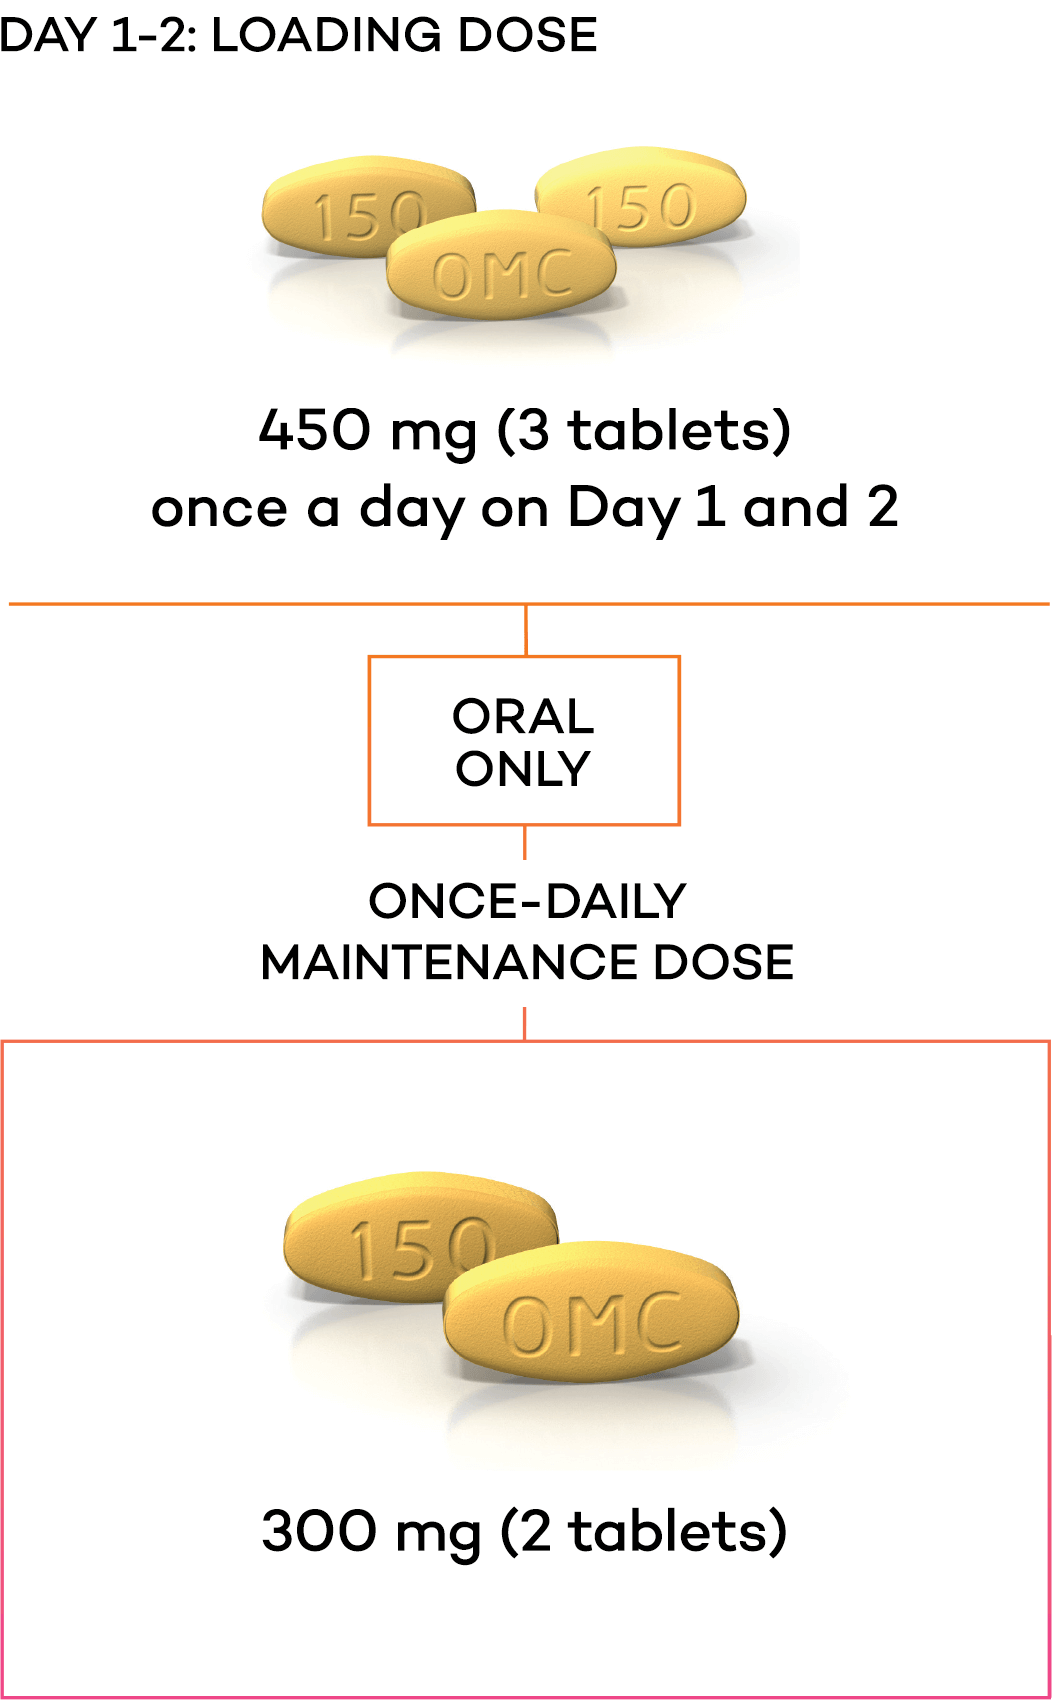 Oral loading dose: 2 NUZYRA 150 mg tablets for a 300 mg oral loading dose taken twice on Day 1 followed by 2 NUZYRA 150 mg tablets for a 300 mg once-daily oral maintenance dose. For additional dosage information, please see Full Prescribing Information, including Table 1.